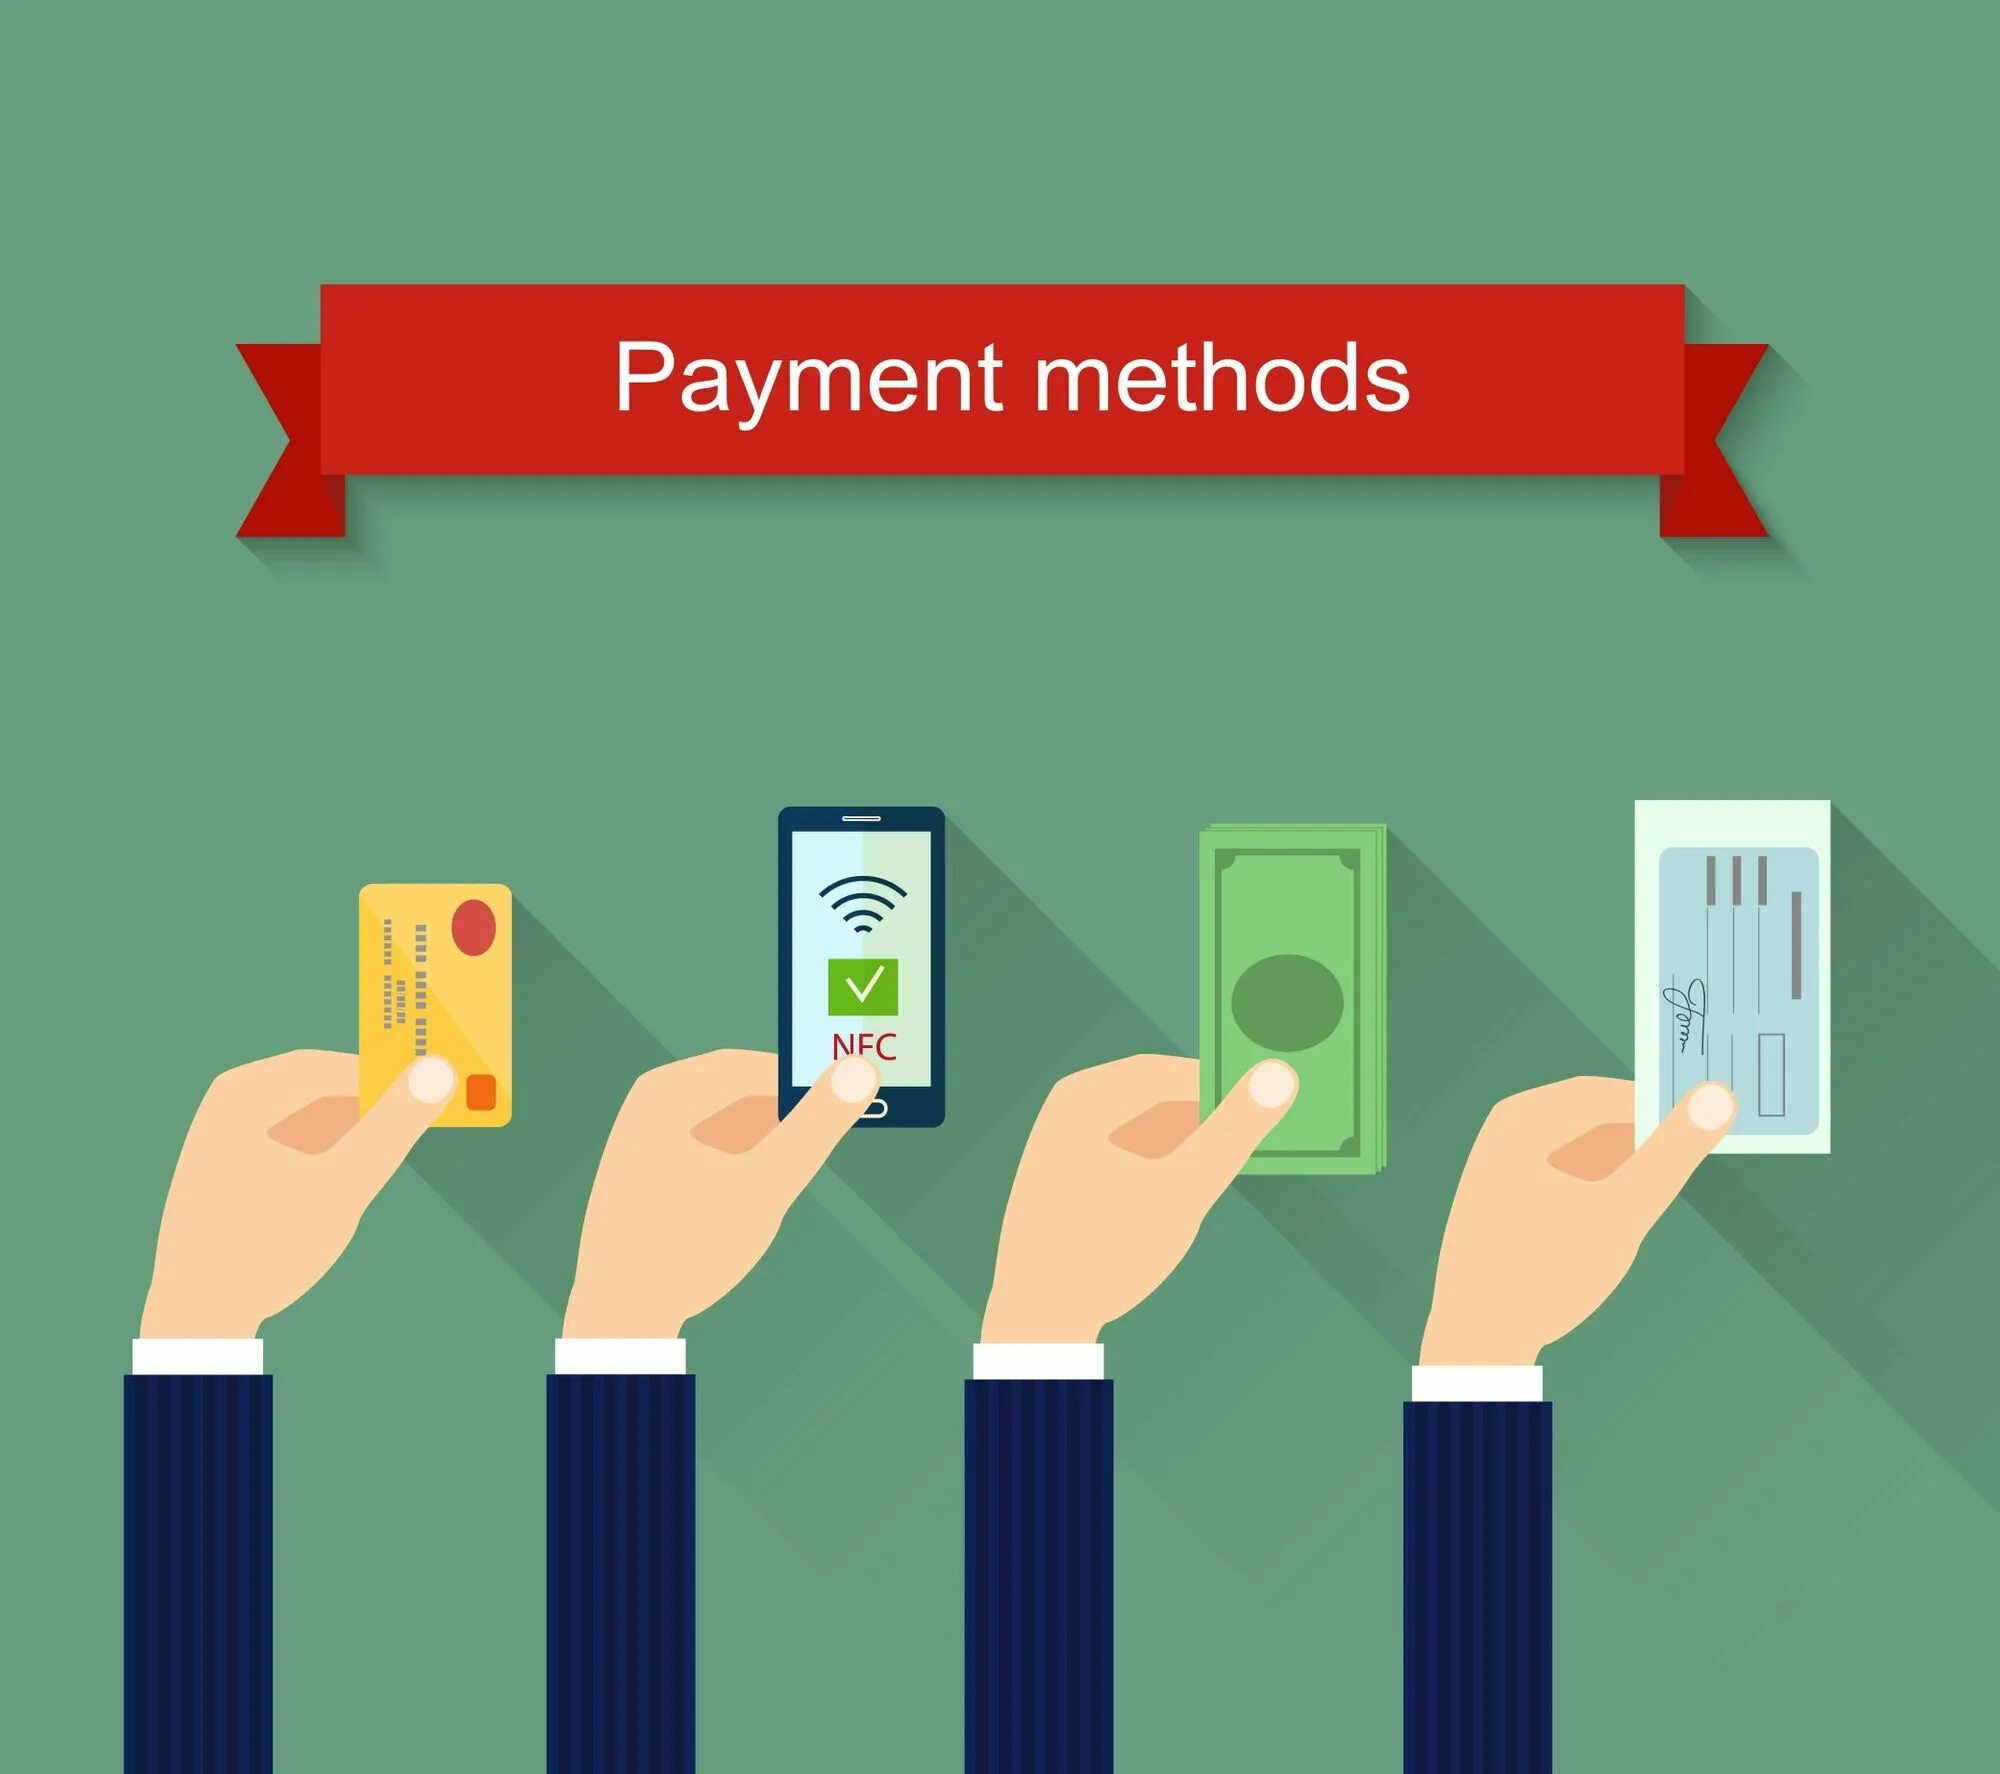 Paying methods. Payment method. Pay methods. Payment methods e Commerce. Деньги из смартфона.